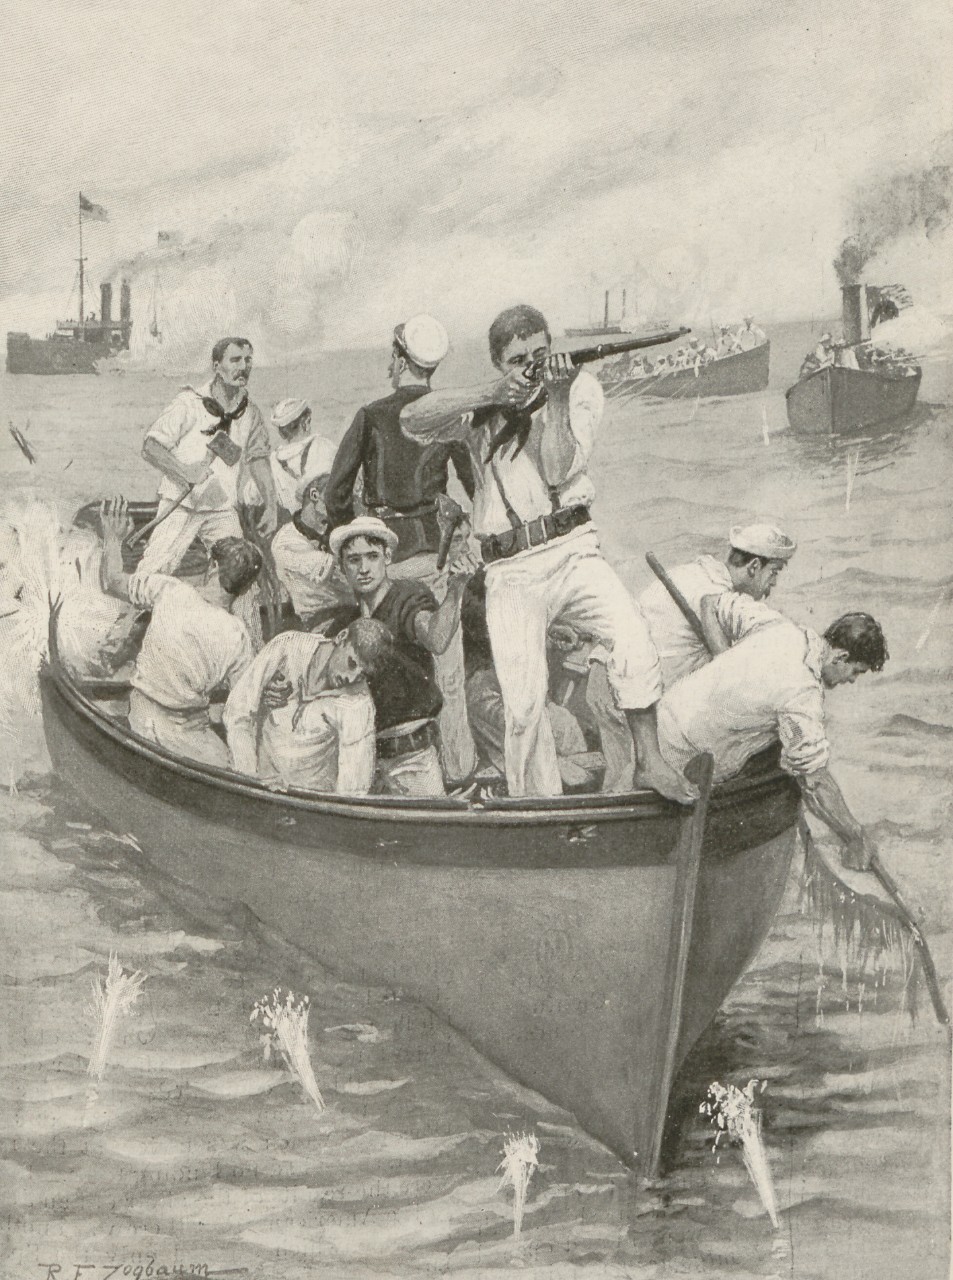 An artist's rendition of cable-cutting operations at the Battle of Punta de la Colorados.